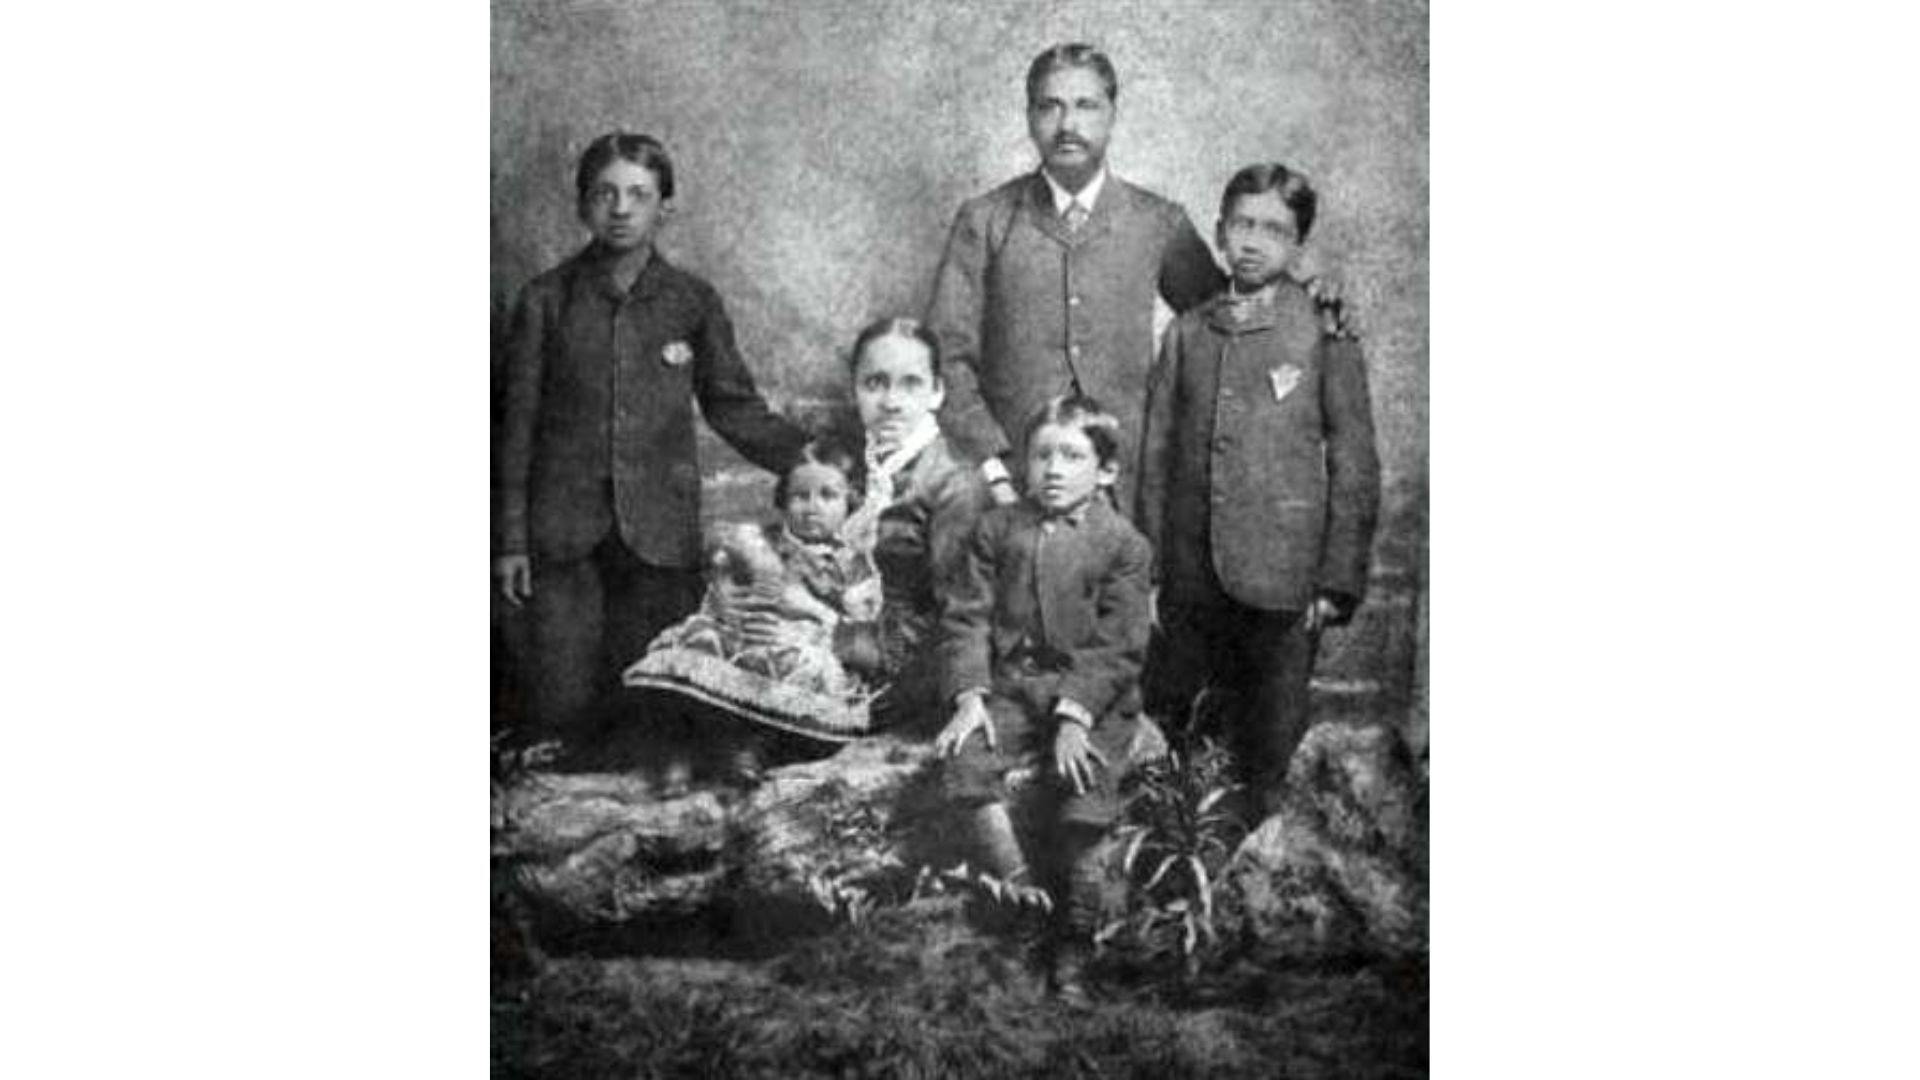 Aurobindo with his family